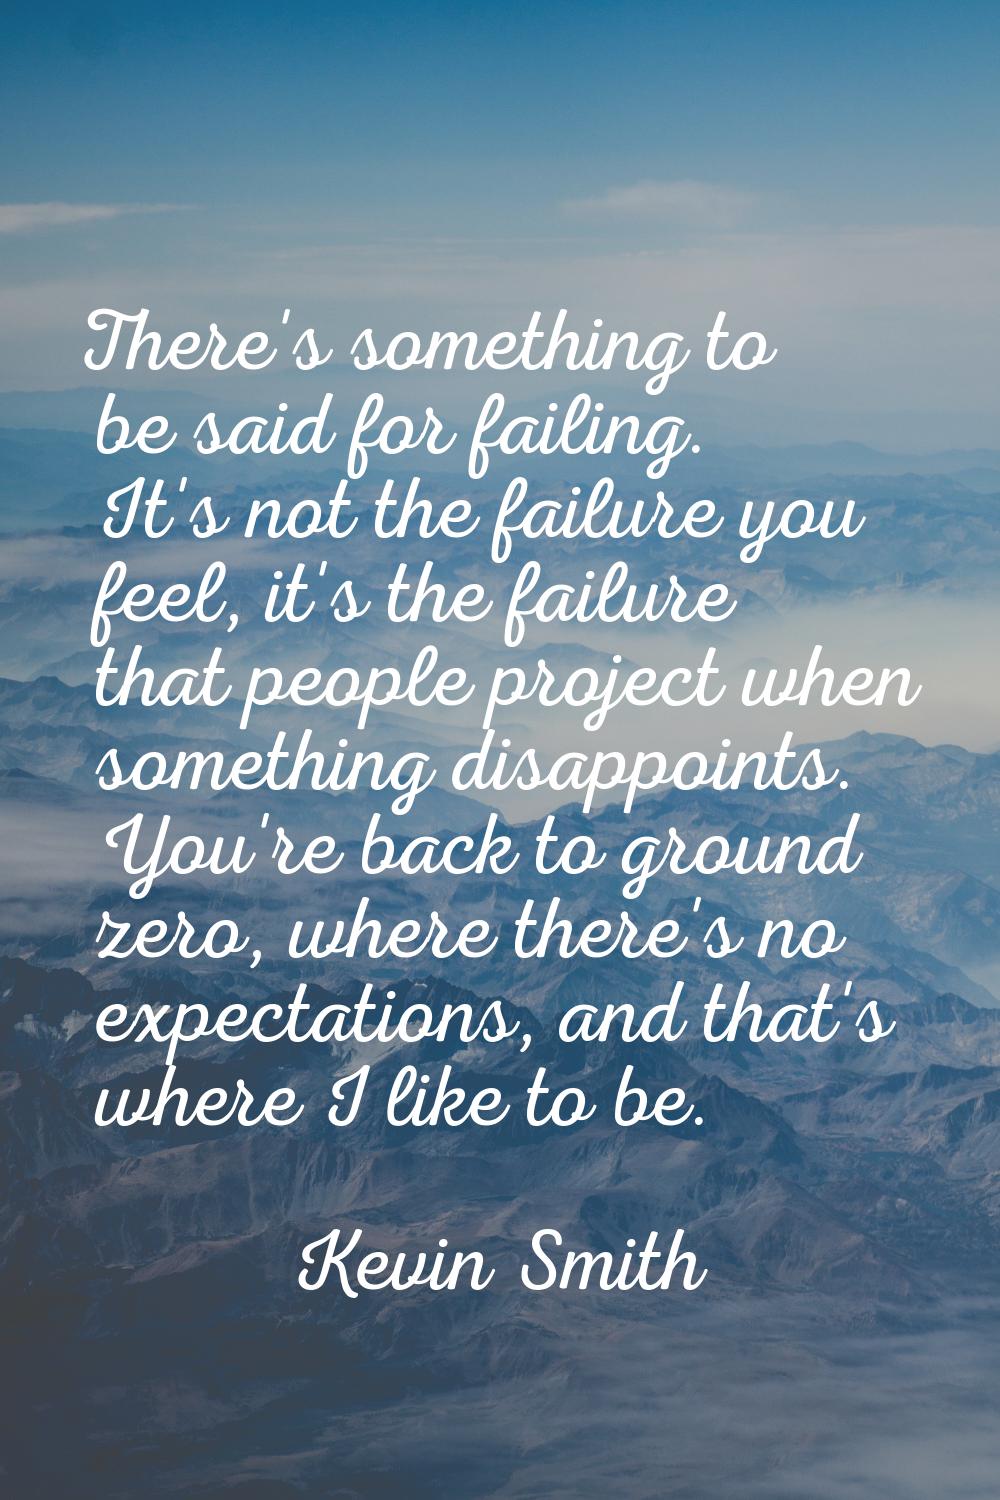 There's something to be said for failing. It's not the failure you feel, it's the failure that peop